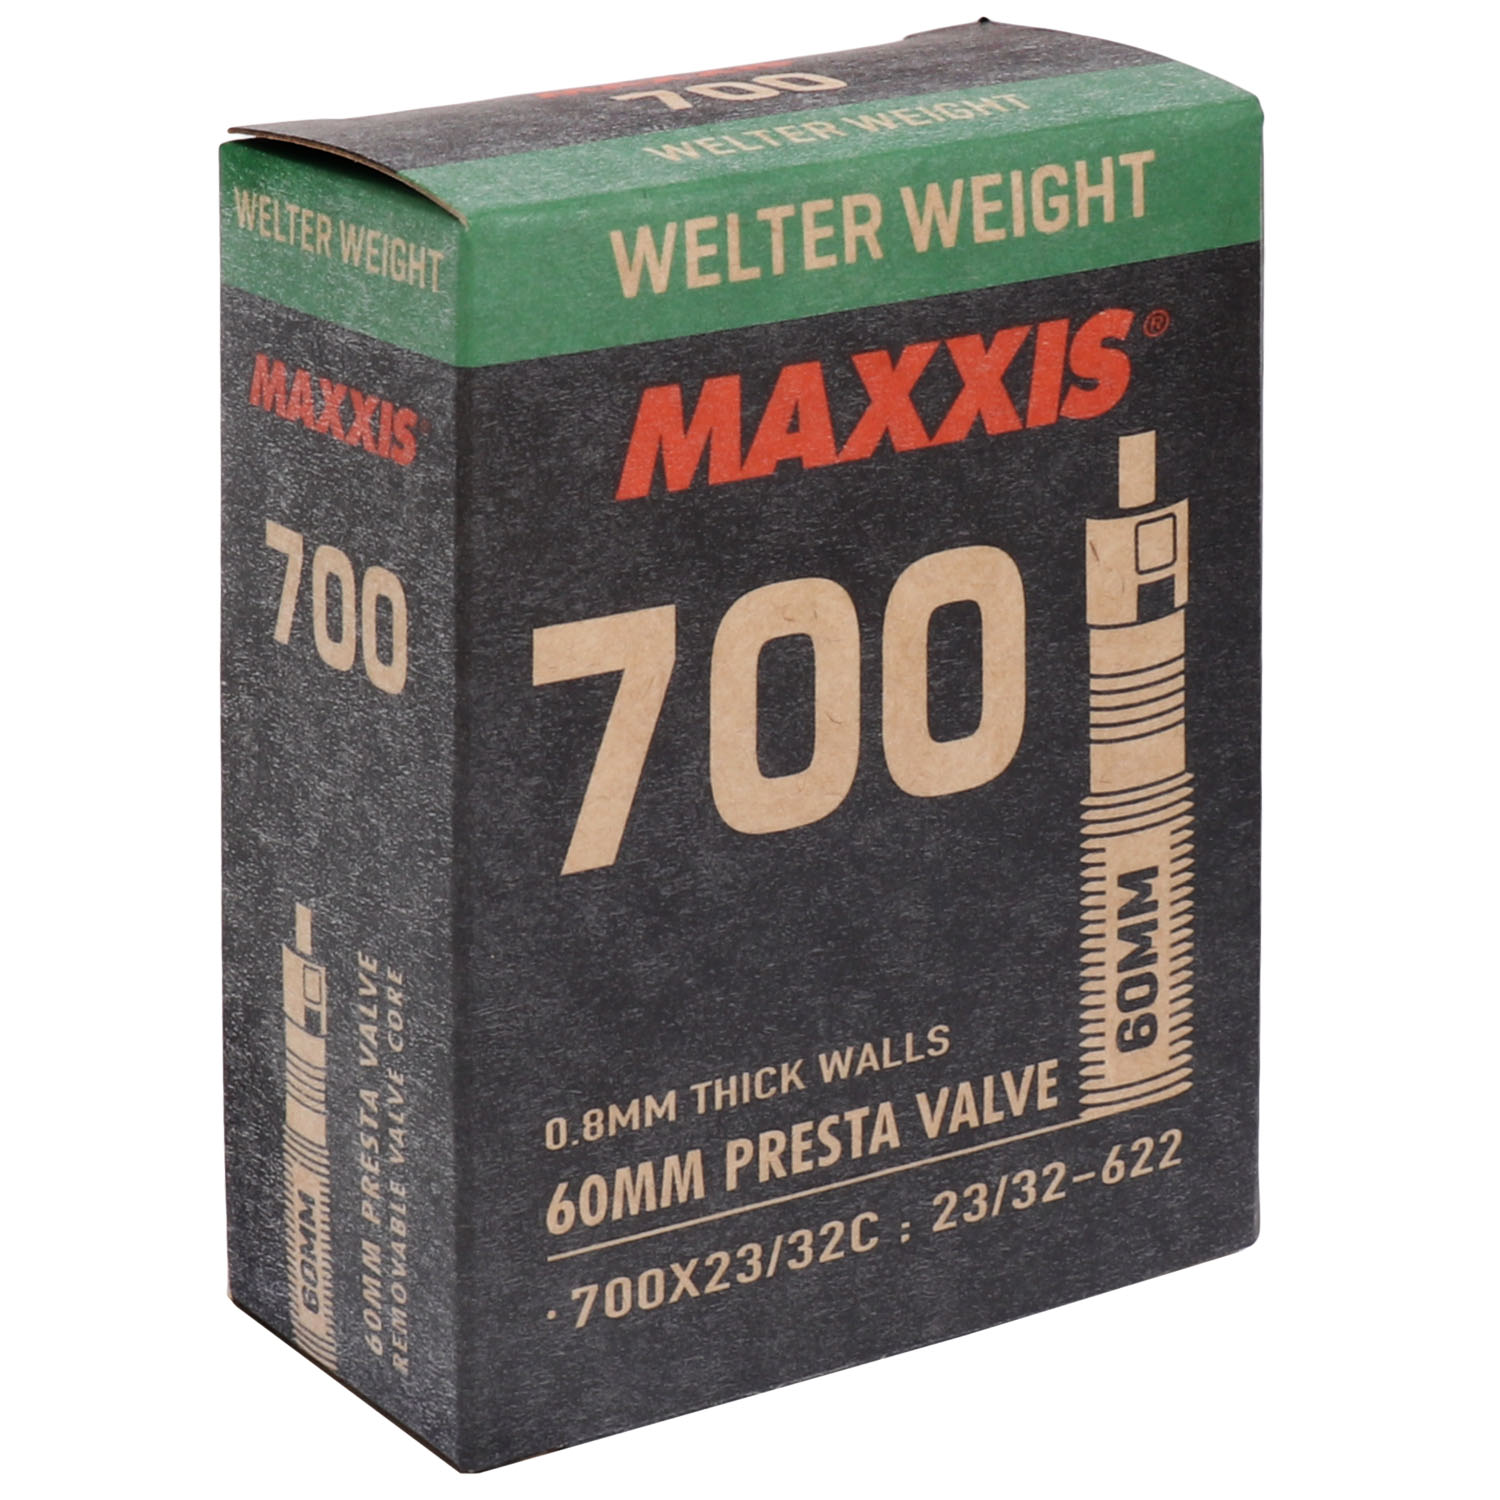 Image of Maxxis WelterWeight Road Tube - 700x23/32C - Presta - 60mm